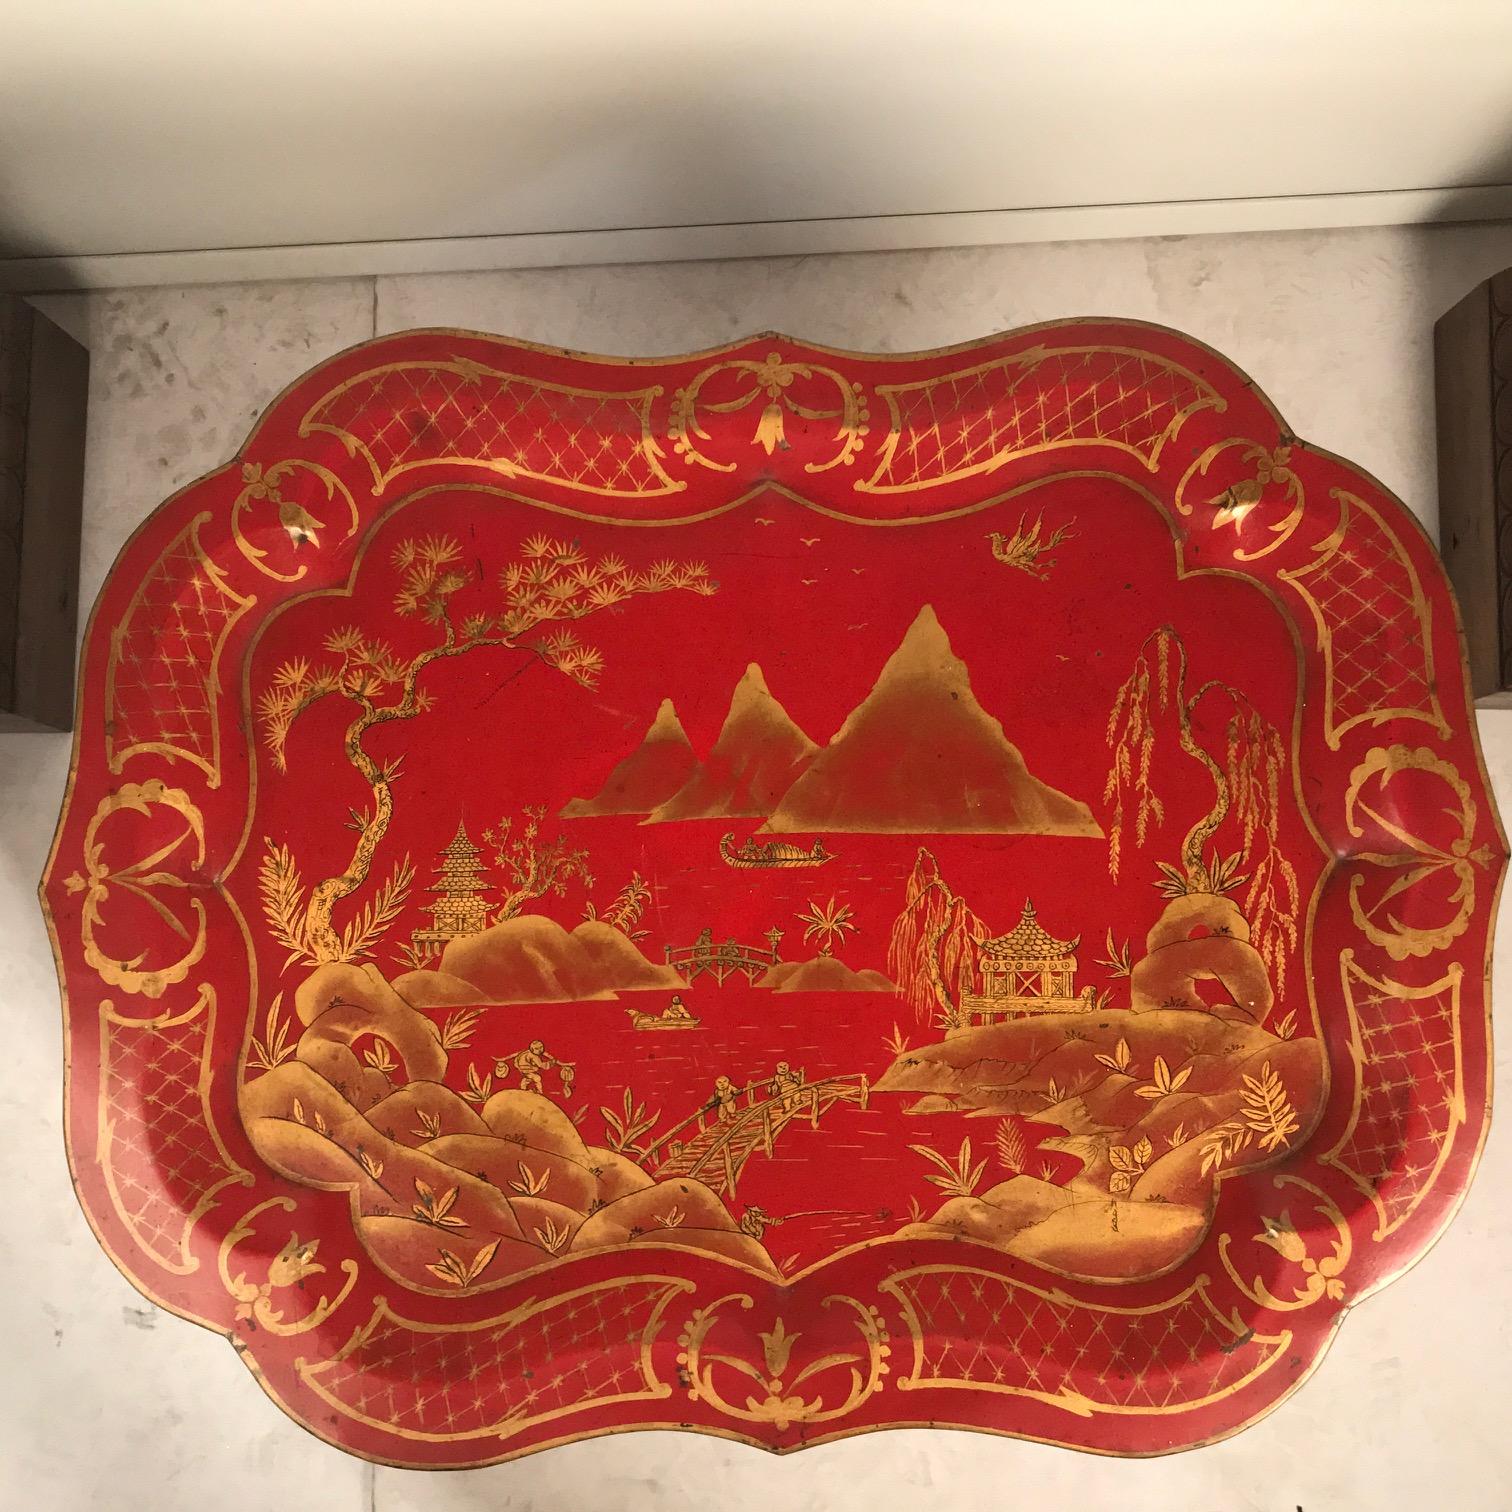 This tray is English Victorian, well-gilt with Chinoiserie decoration of pavilions, bridges, fishermen in an extensive mountainous landscape, within a shaped and gilt border. We do not often see scarlet trays like this one in this country. Because